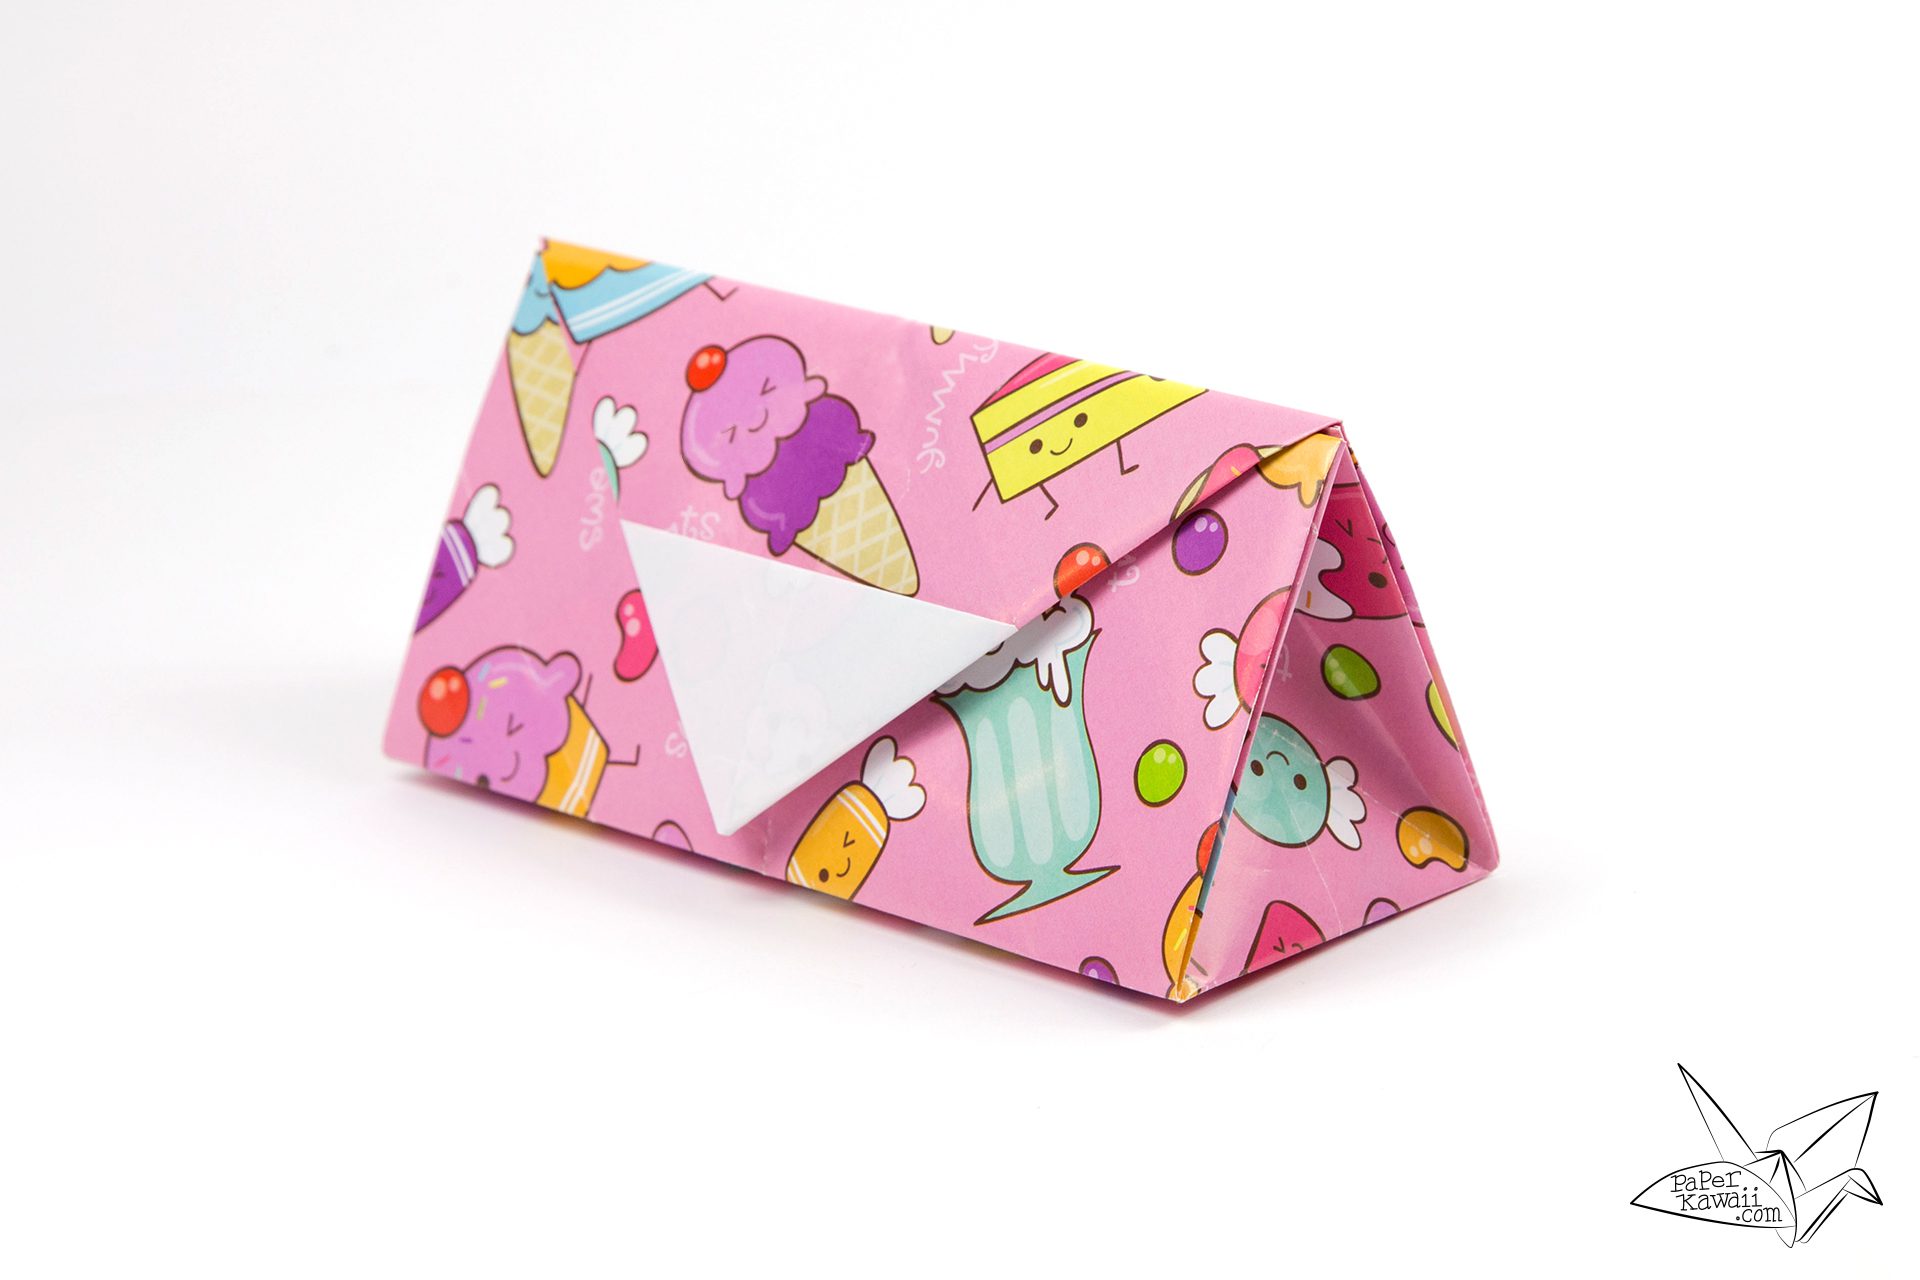 Free Printable Paper Purse. - Oh My Fiesta! in english